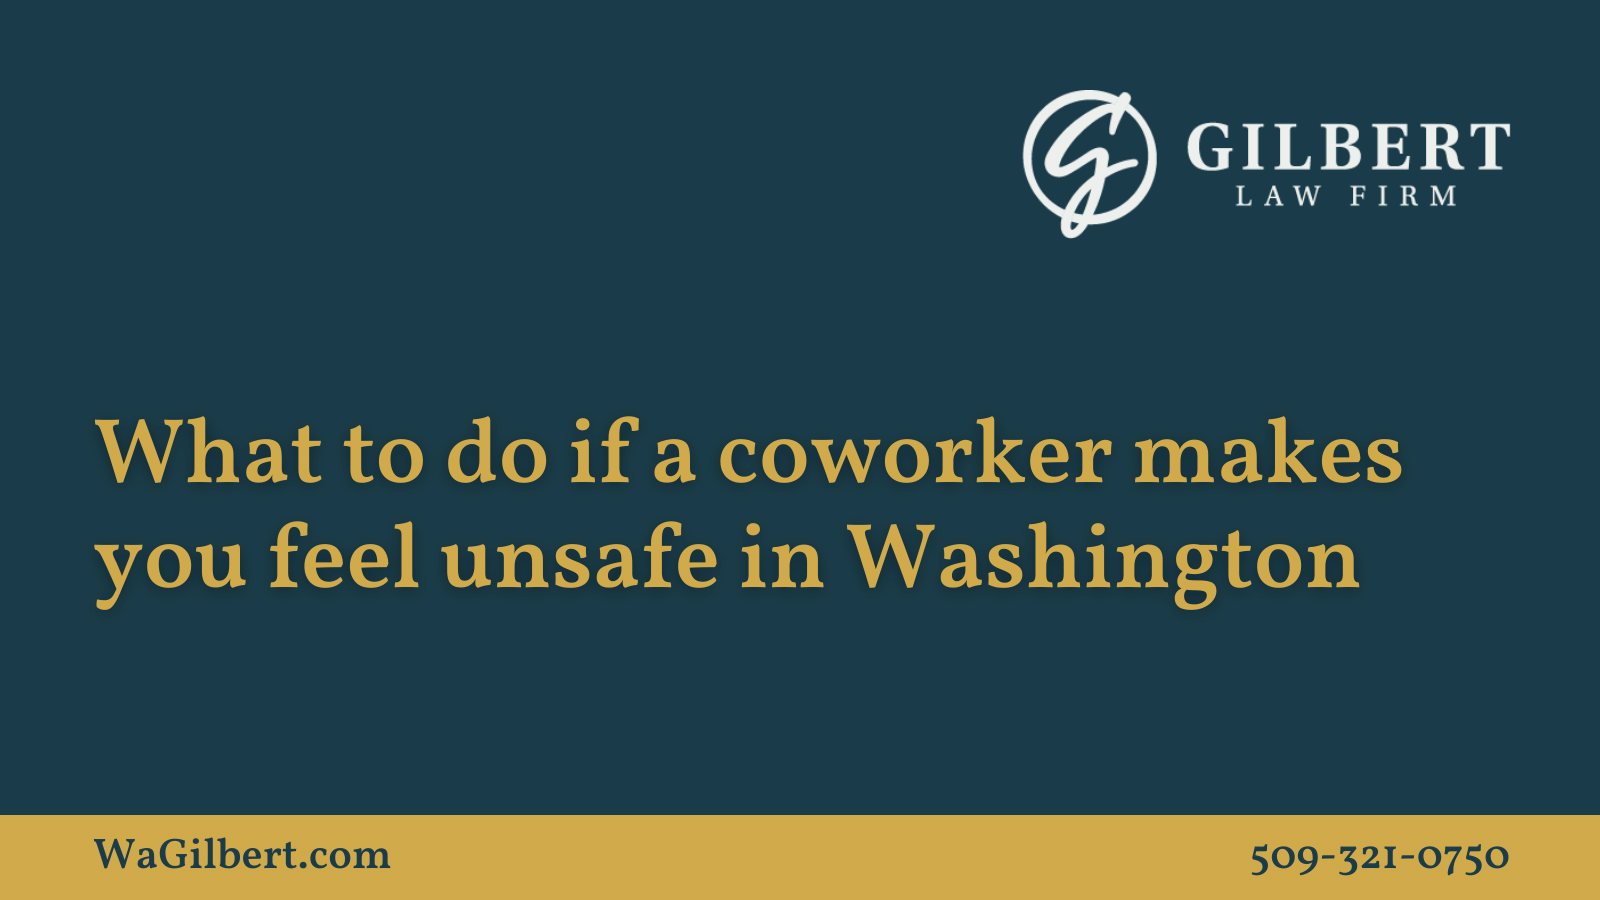 What to do if a coworker makes you feel unsafe in Washington| Gilbert Law Firm Spokane Washington